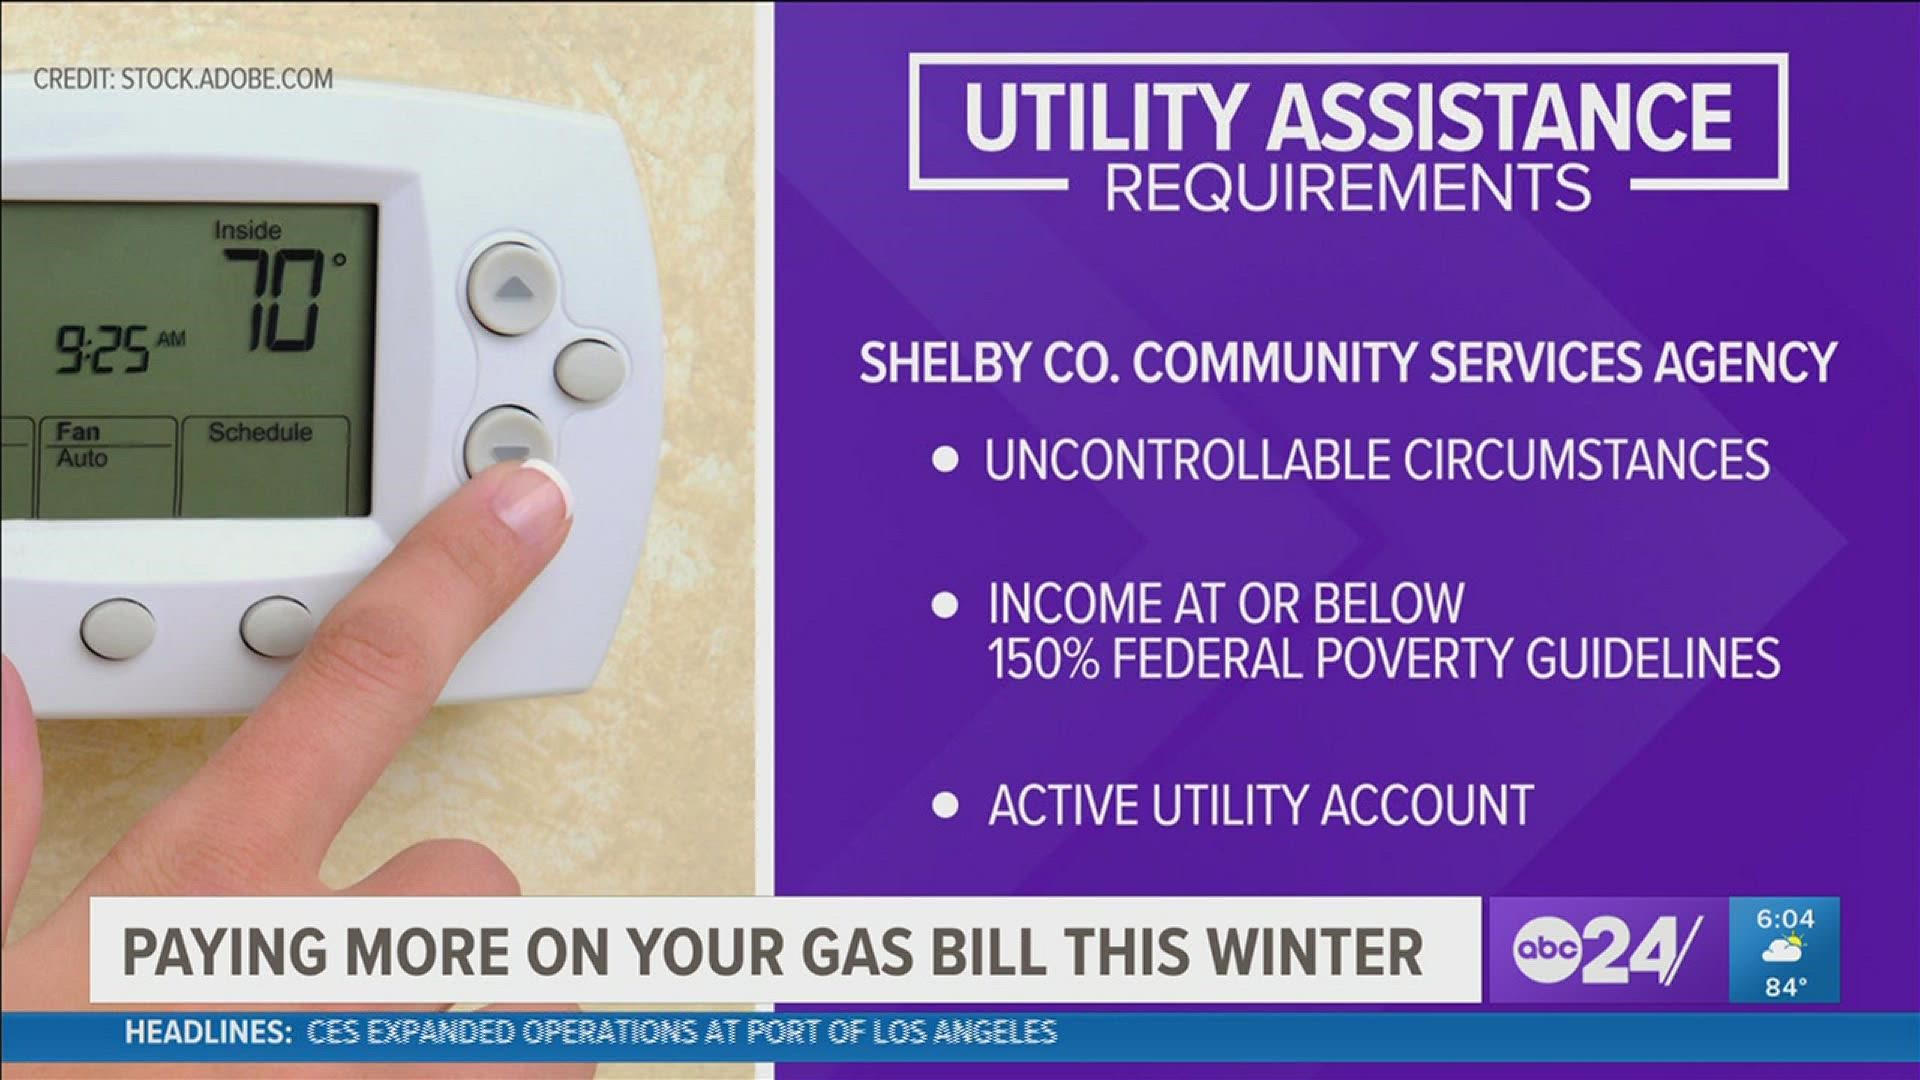 MLGW reported customers can expect their heating bills to increase by 20-30% during the winter months.